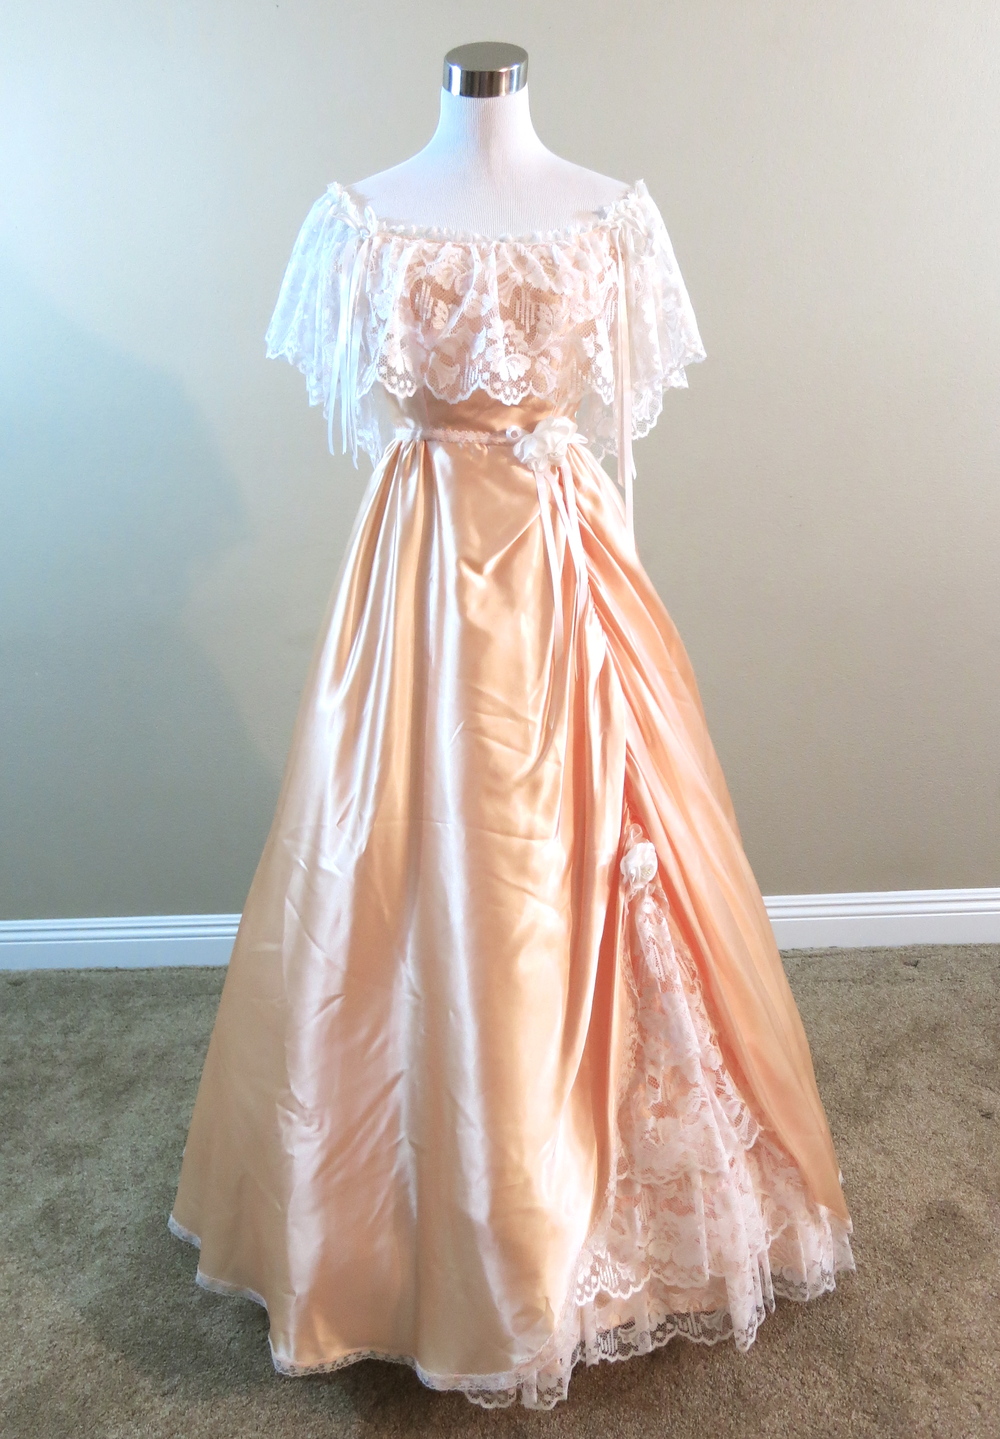 Vintage Ball Gowns — Civil War Ball Gowns & Belle-Styled Dresses